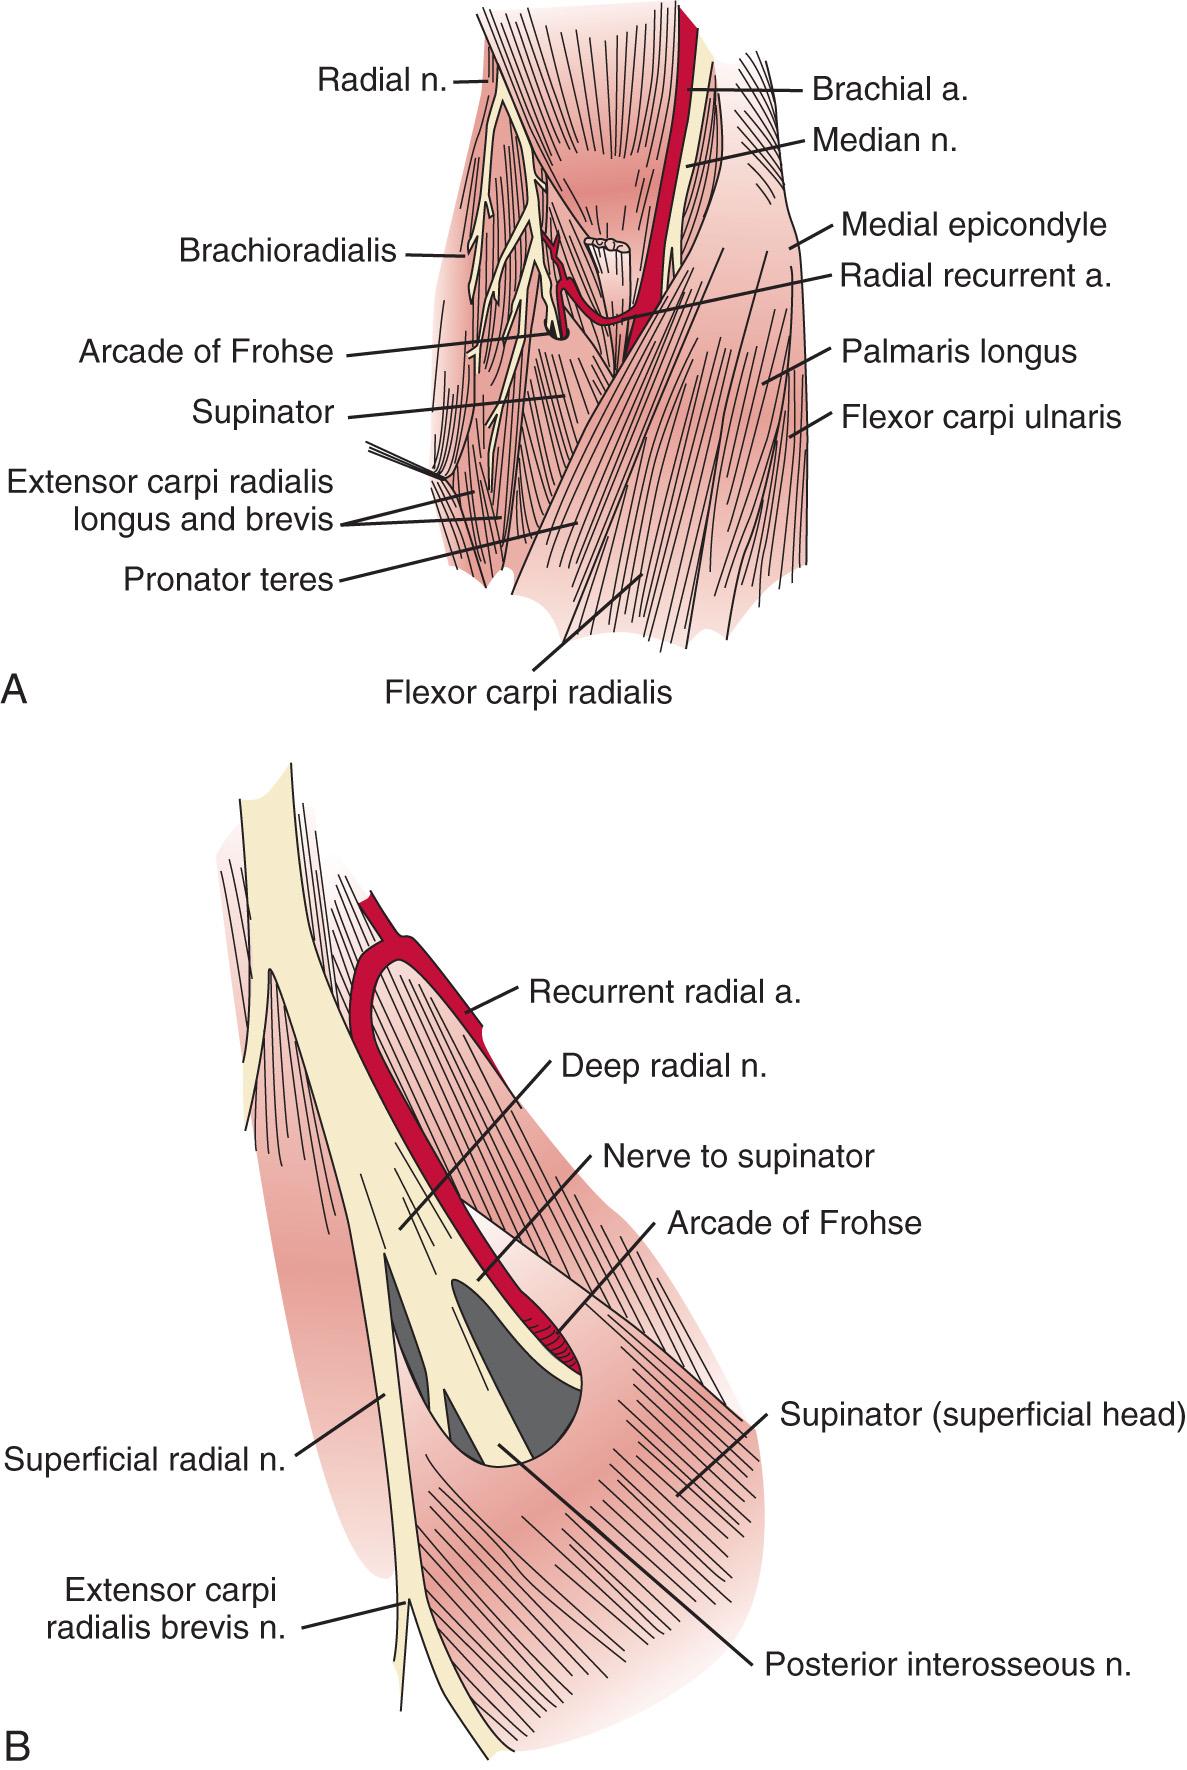 FIG 72.2, (A) Dissection of the anterior aspect of the elbow demonstrating the anatomic relationship with the radial nerve. (B) An enlarged view of the antecubital fossa shows the relationship of the posterior interosseous nerve to the supinator muscle and the arcade of Frohse. Note how the proximal superficial radial nerve is spared from compression by the arcade. a. , Artery; n. , nerve.